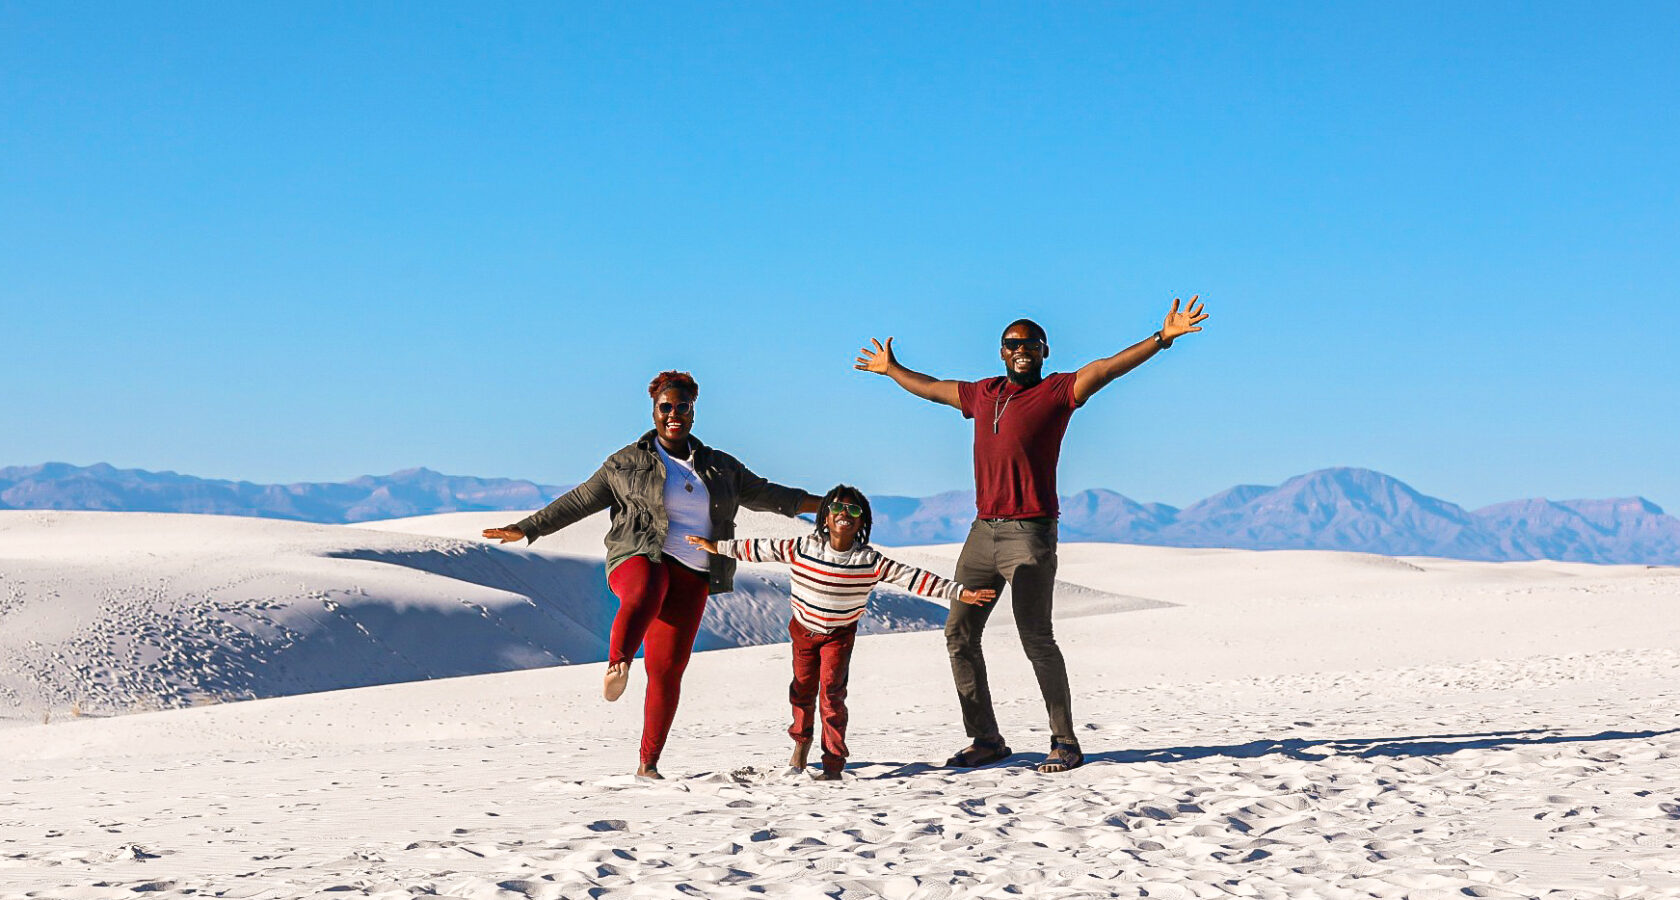 Family Travel Websites That Will Inspire Epic Adventures Together